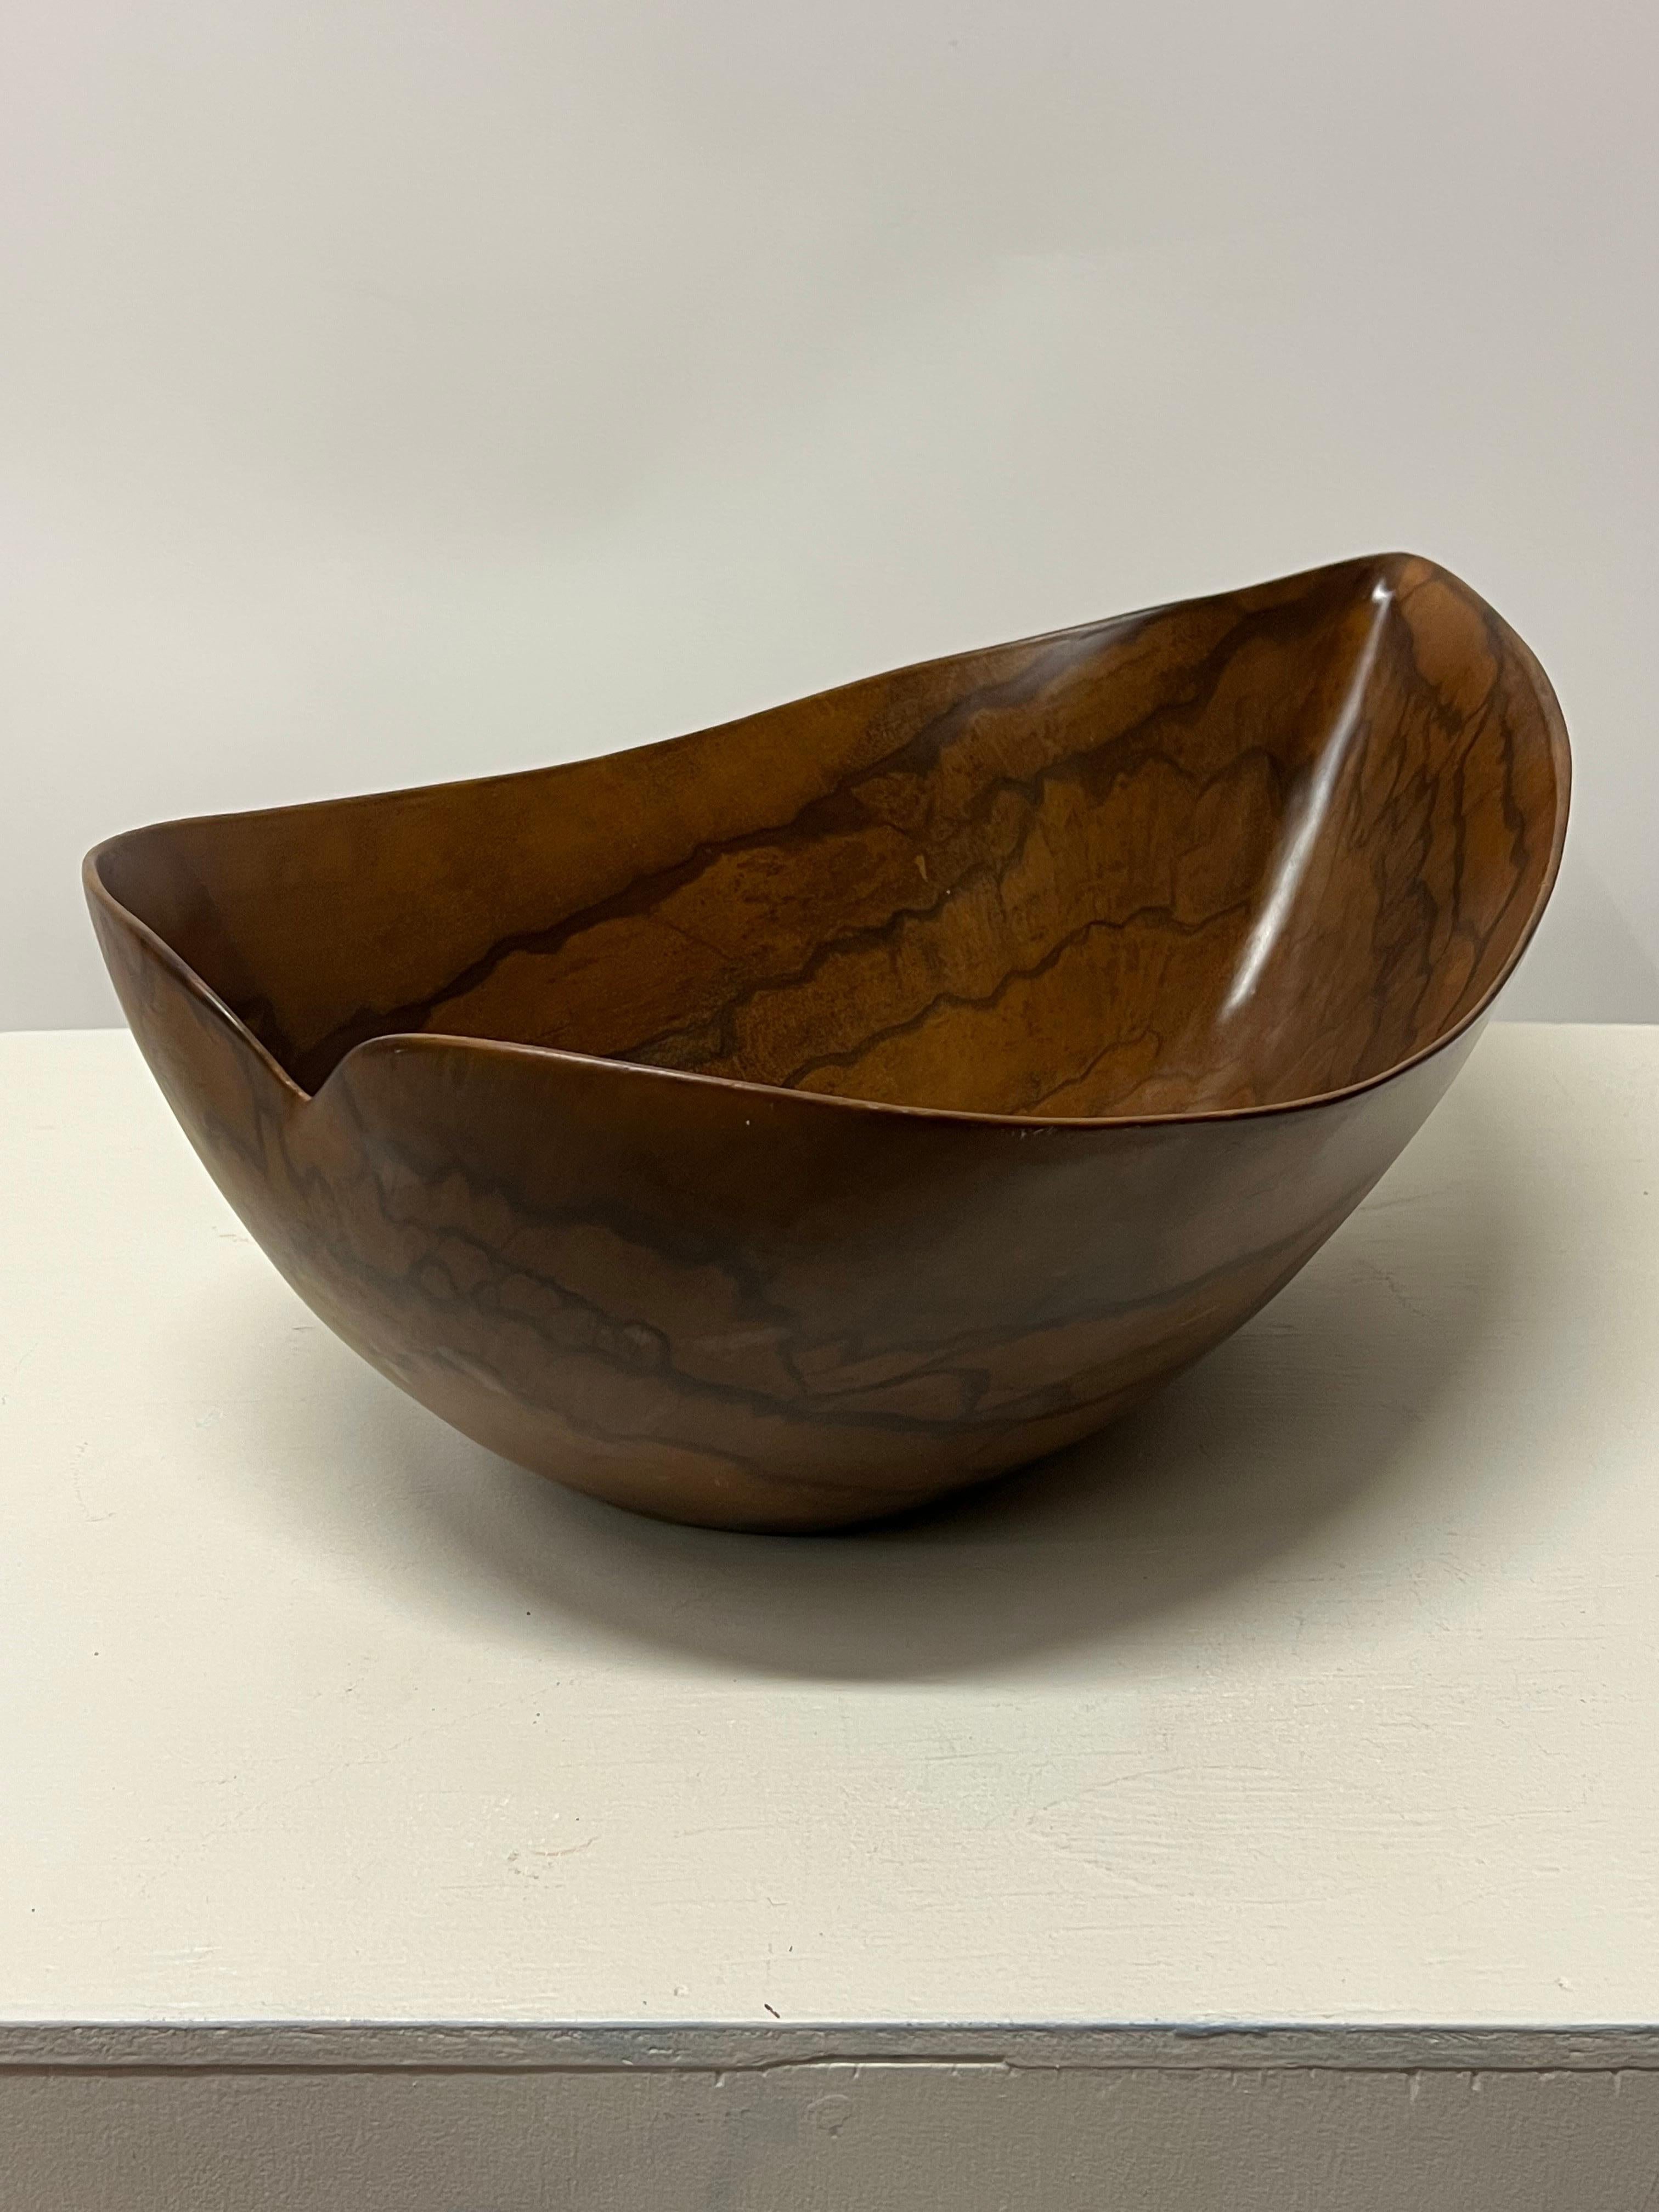 Stunning teak centerpiece bowl by artist, David Auld c1960s. Amazing grain and epic size. Signed on bottom. 